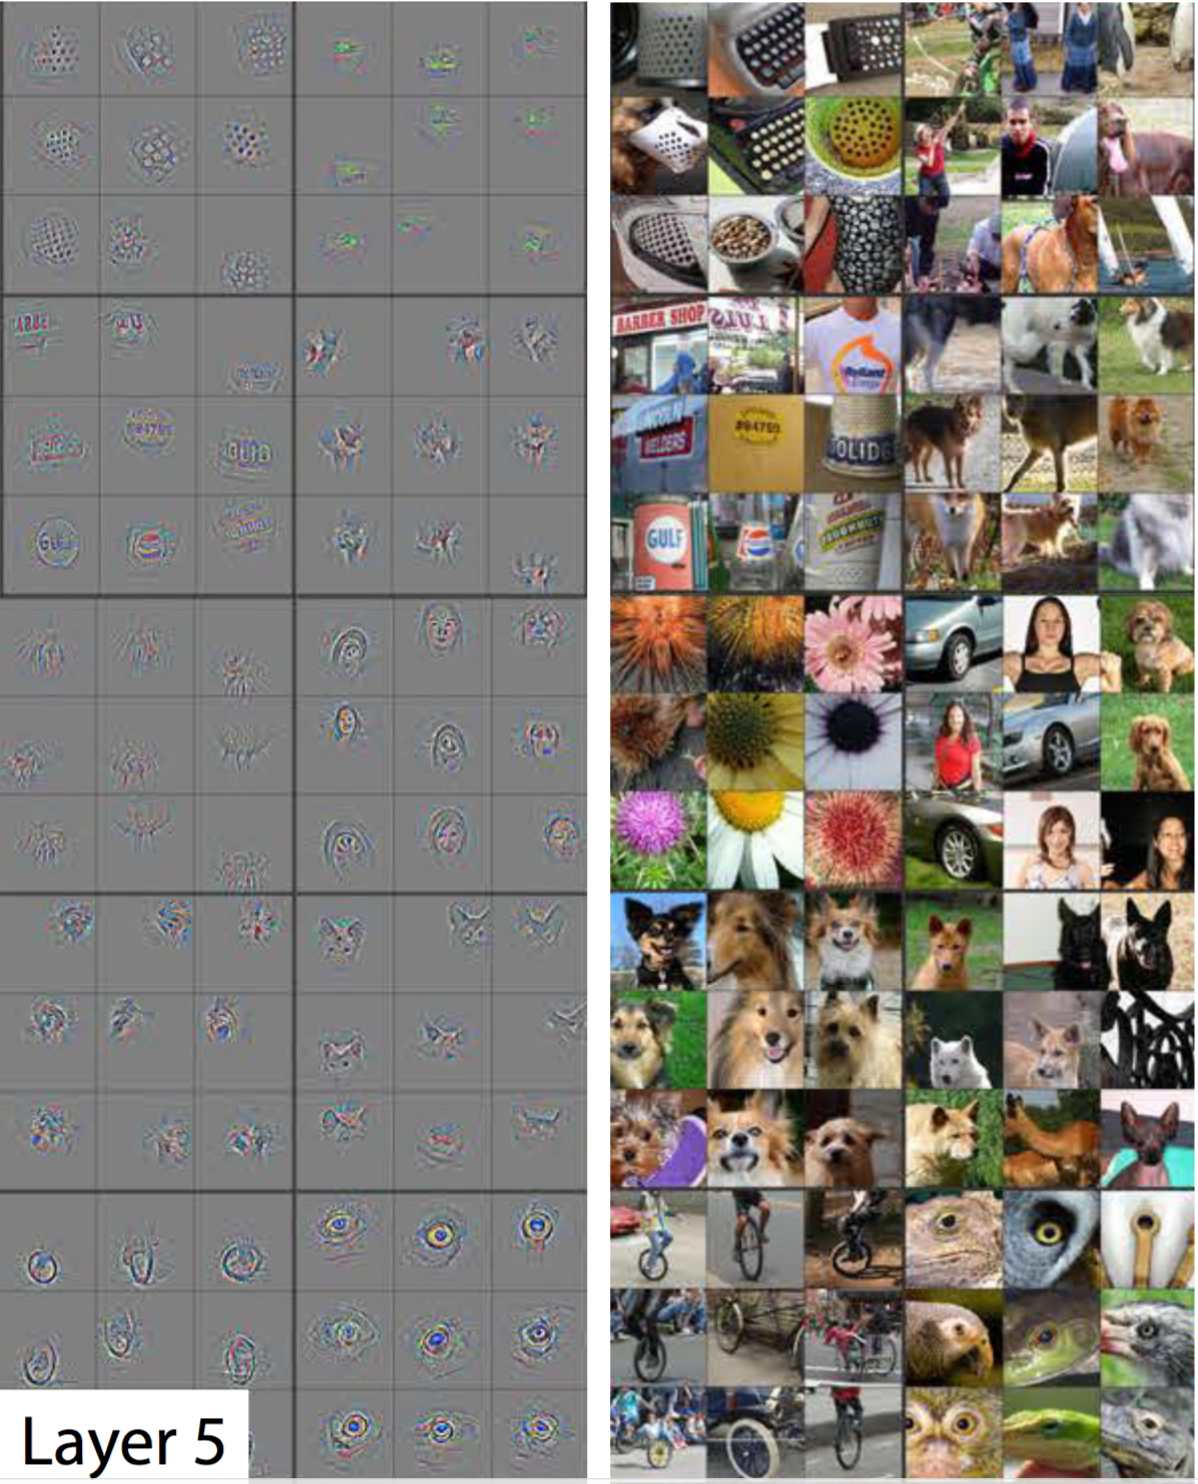 A visualization of the fifth and final layer of the CNN. The gray grid on the left represents how this layer of the CNN activates (or "what it sees") based on the corresponding images from the grid on the right.